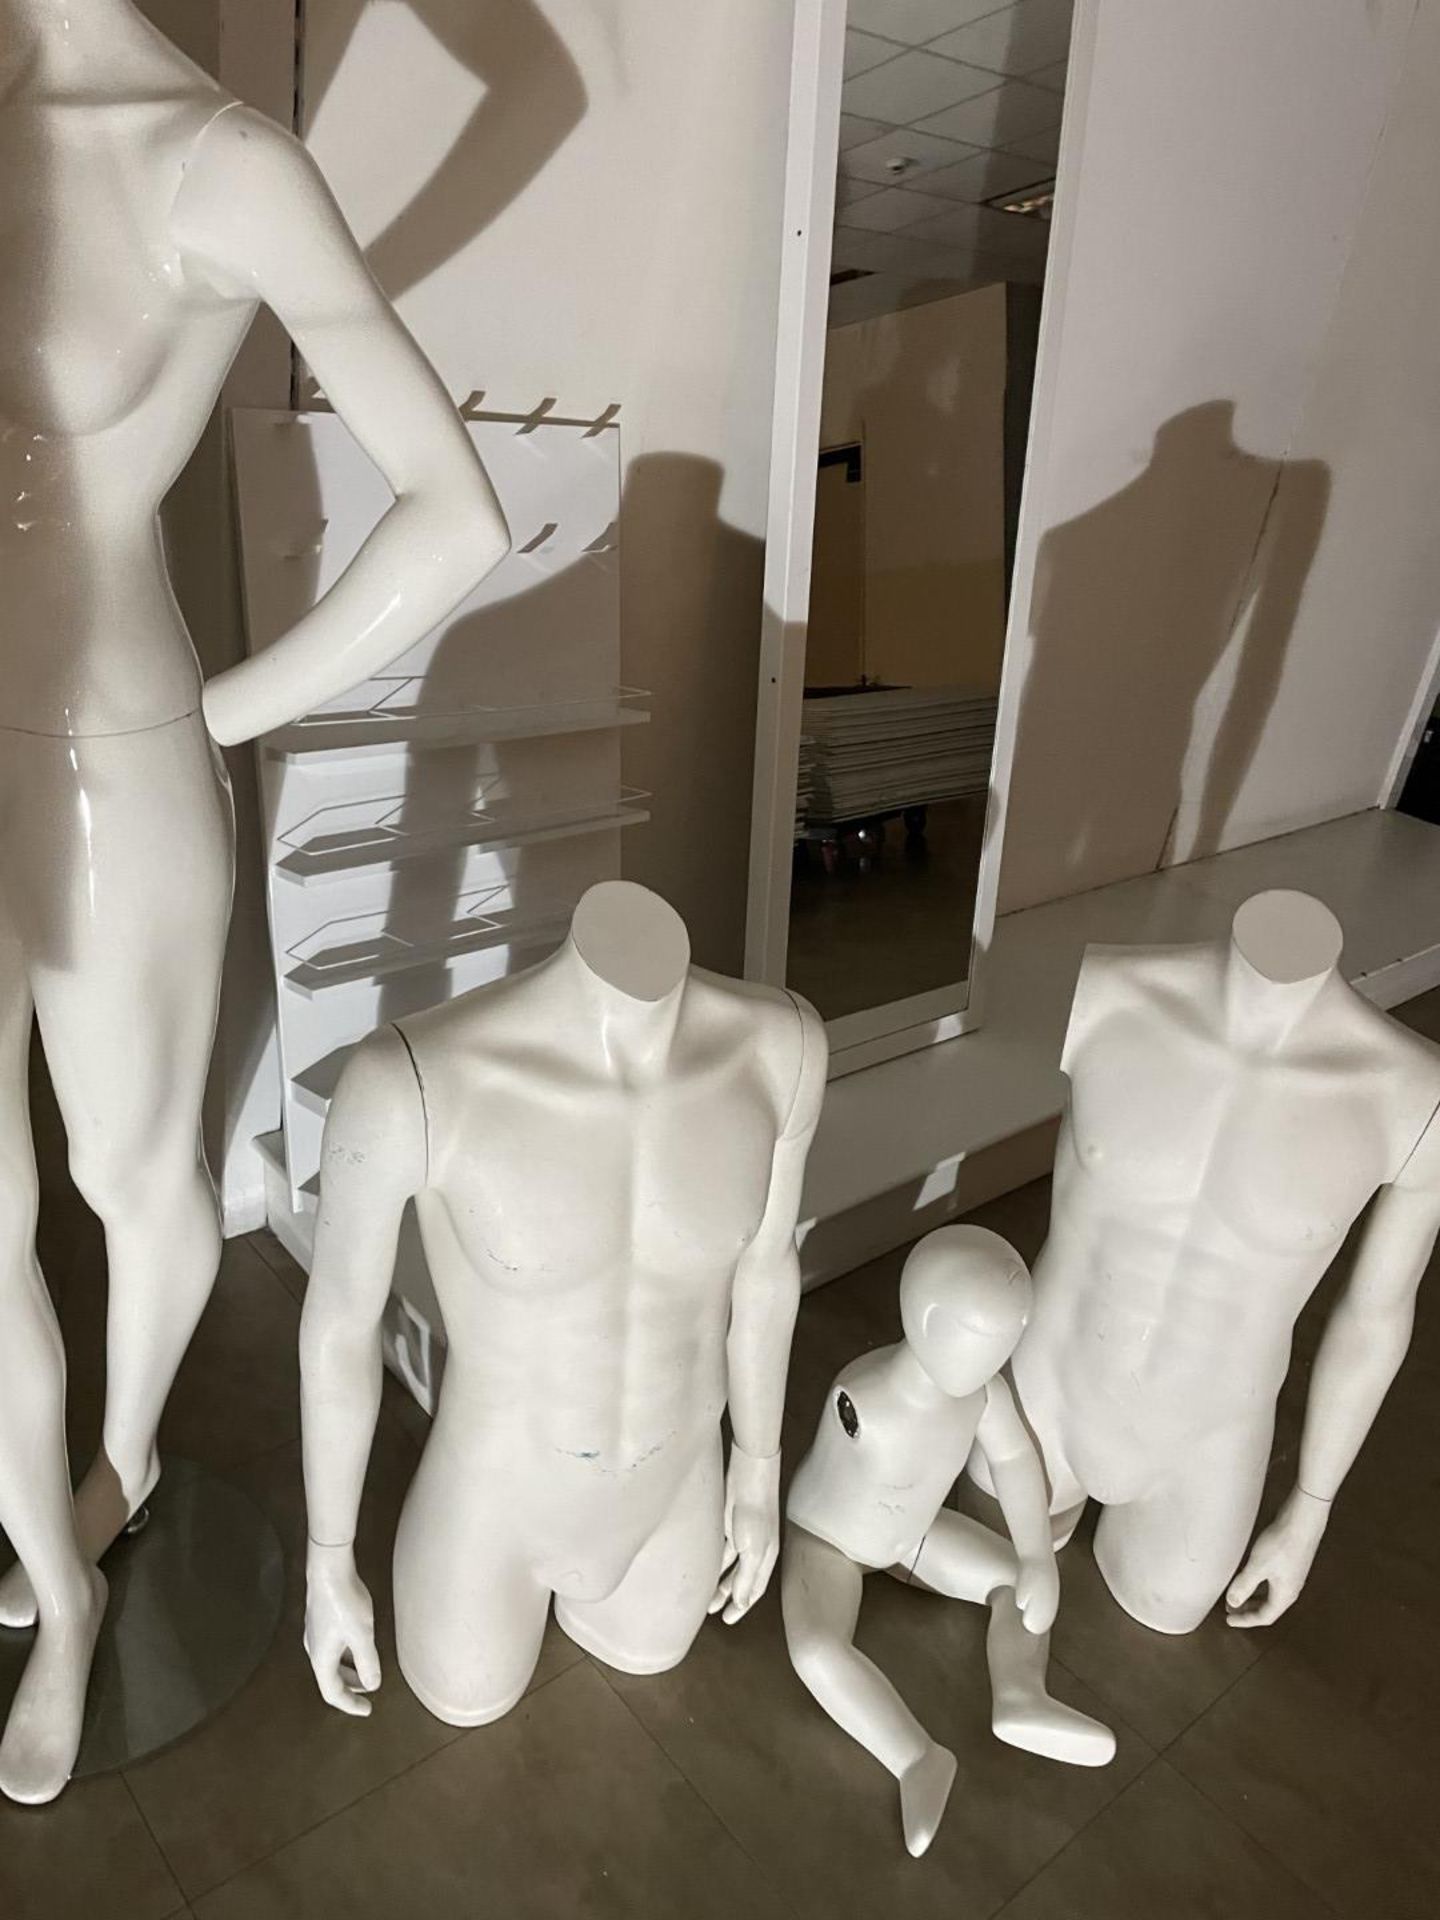 6 x Assorted Mannequins Plus Four 1 x Wall Mirror and 1 x Wall Display - Includes Complete and - Image 6 of 7